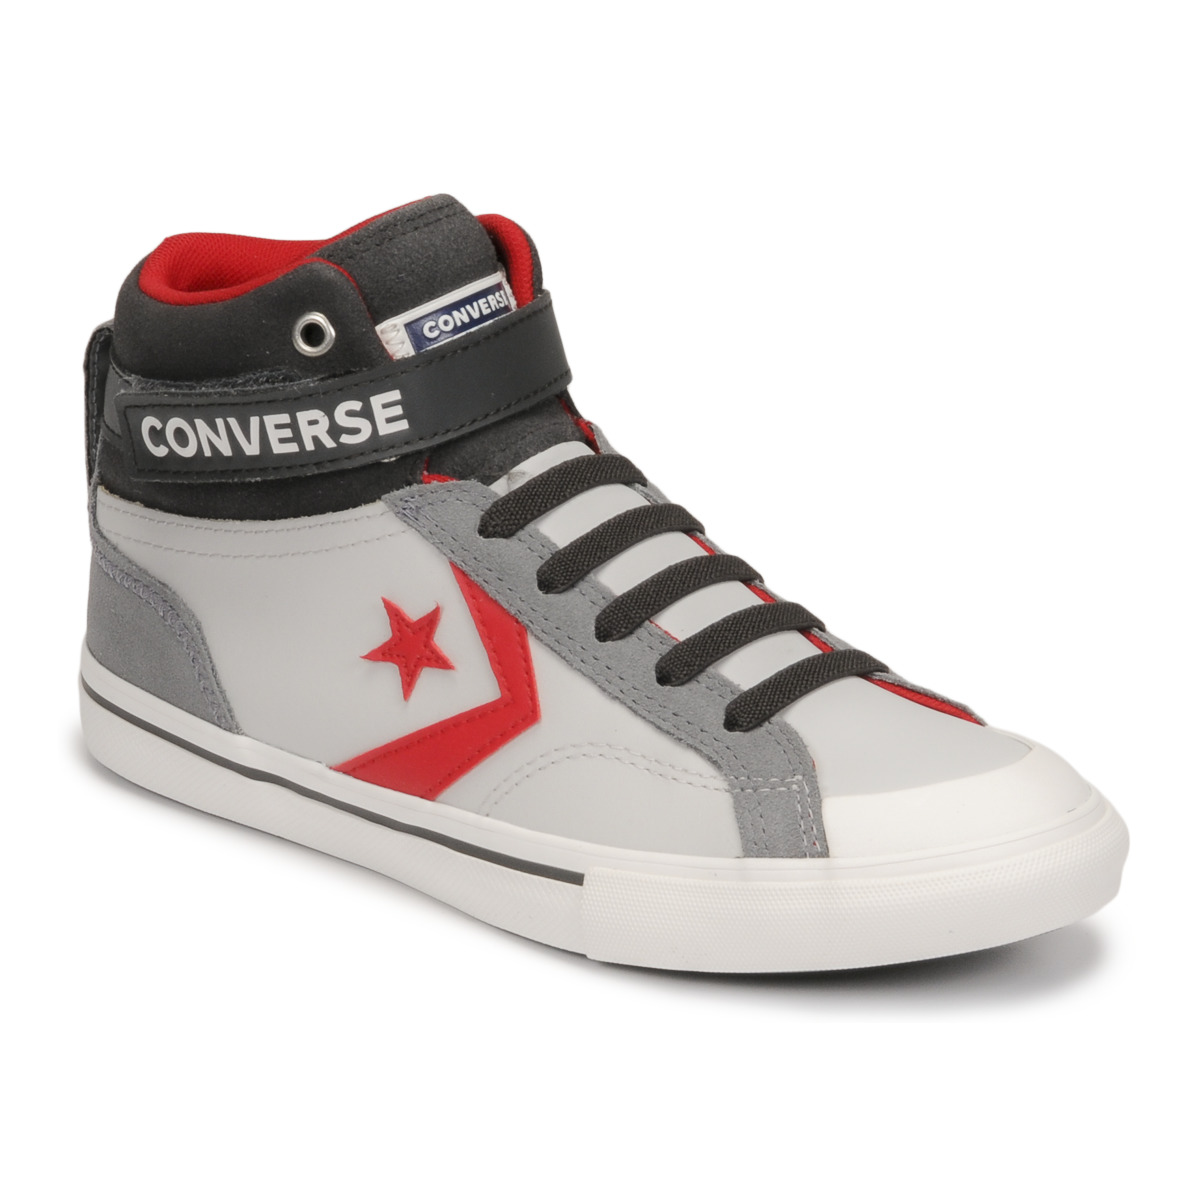 Converse PRO BLAZE STRAP LEATHER TWIST HI Grey - Free Delivery with  Rubbersole.co.uk ! - Shoes Hi top trainers Child £